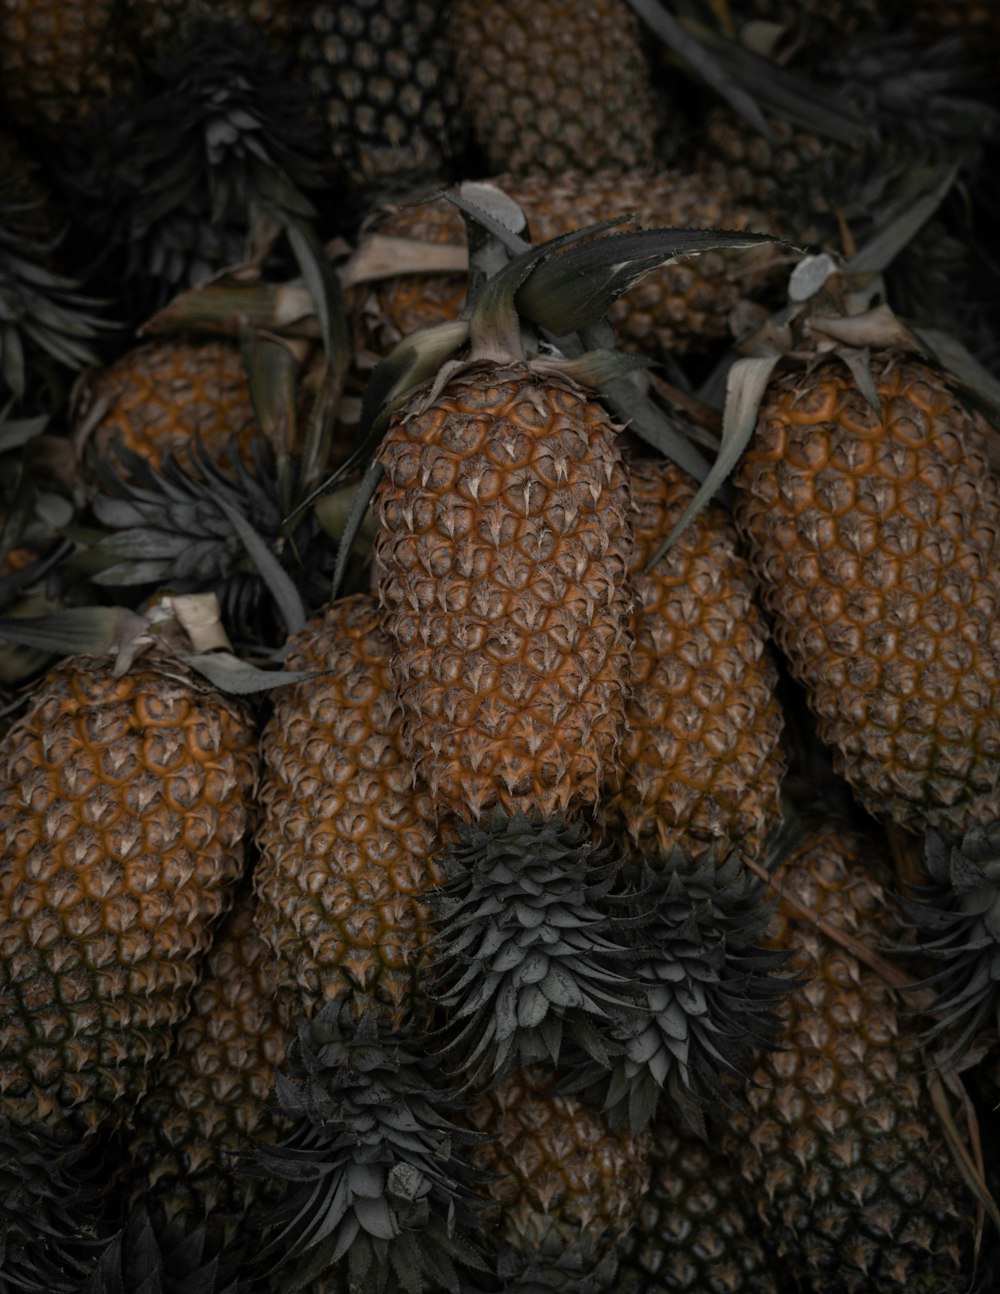 yellow and green pineapple fruits